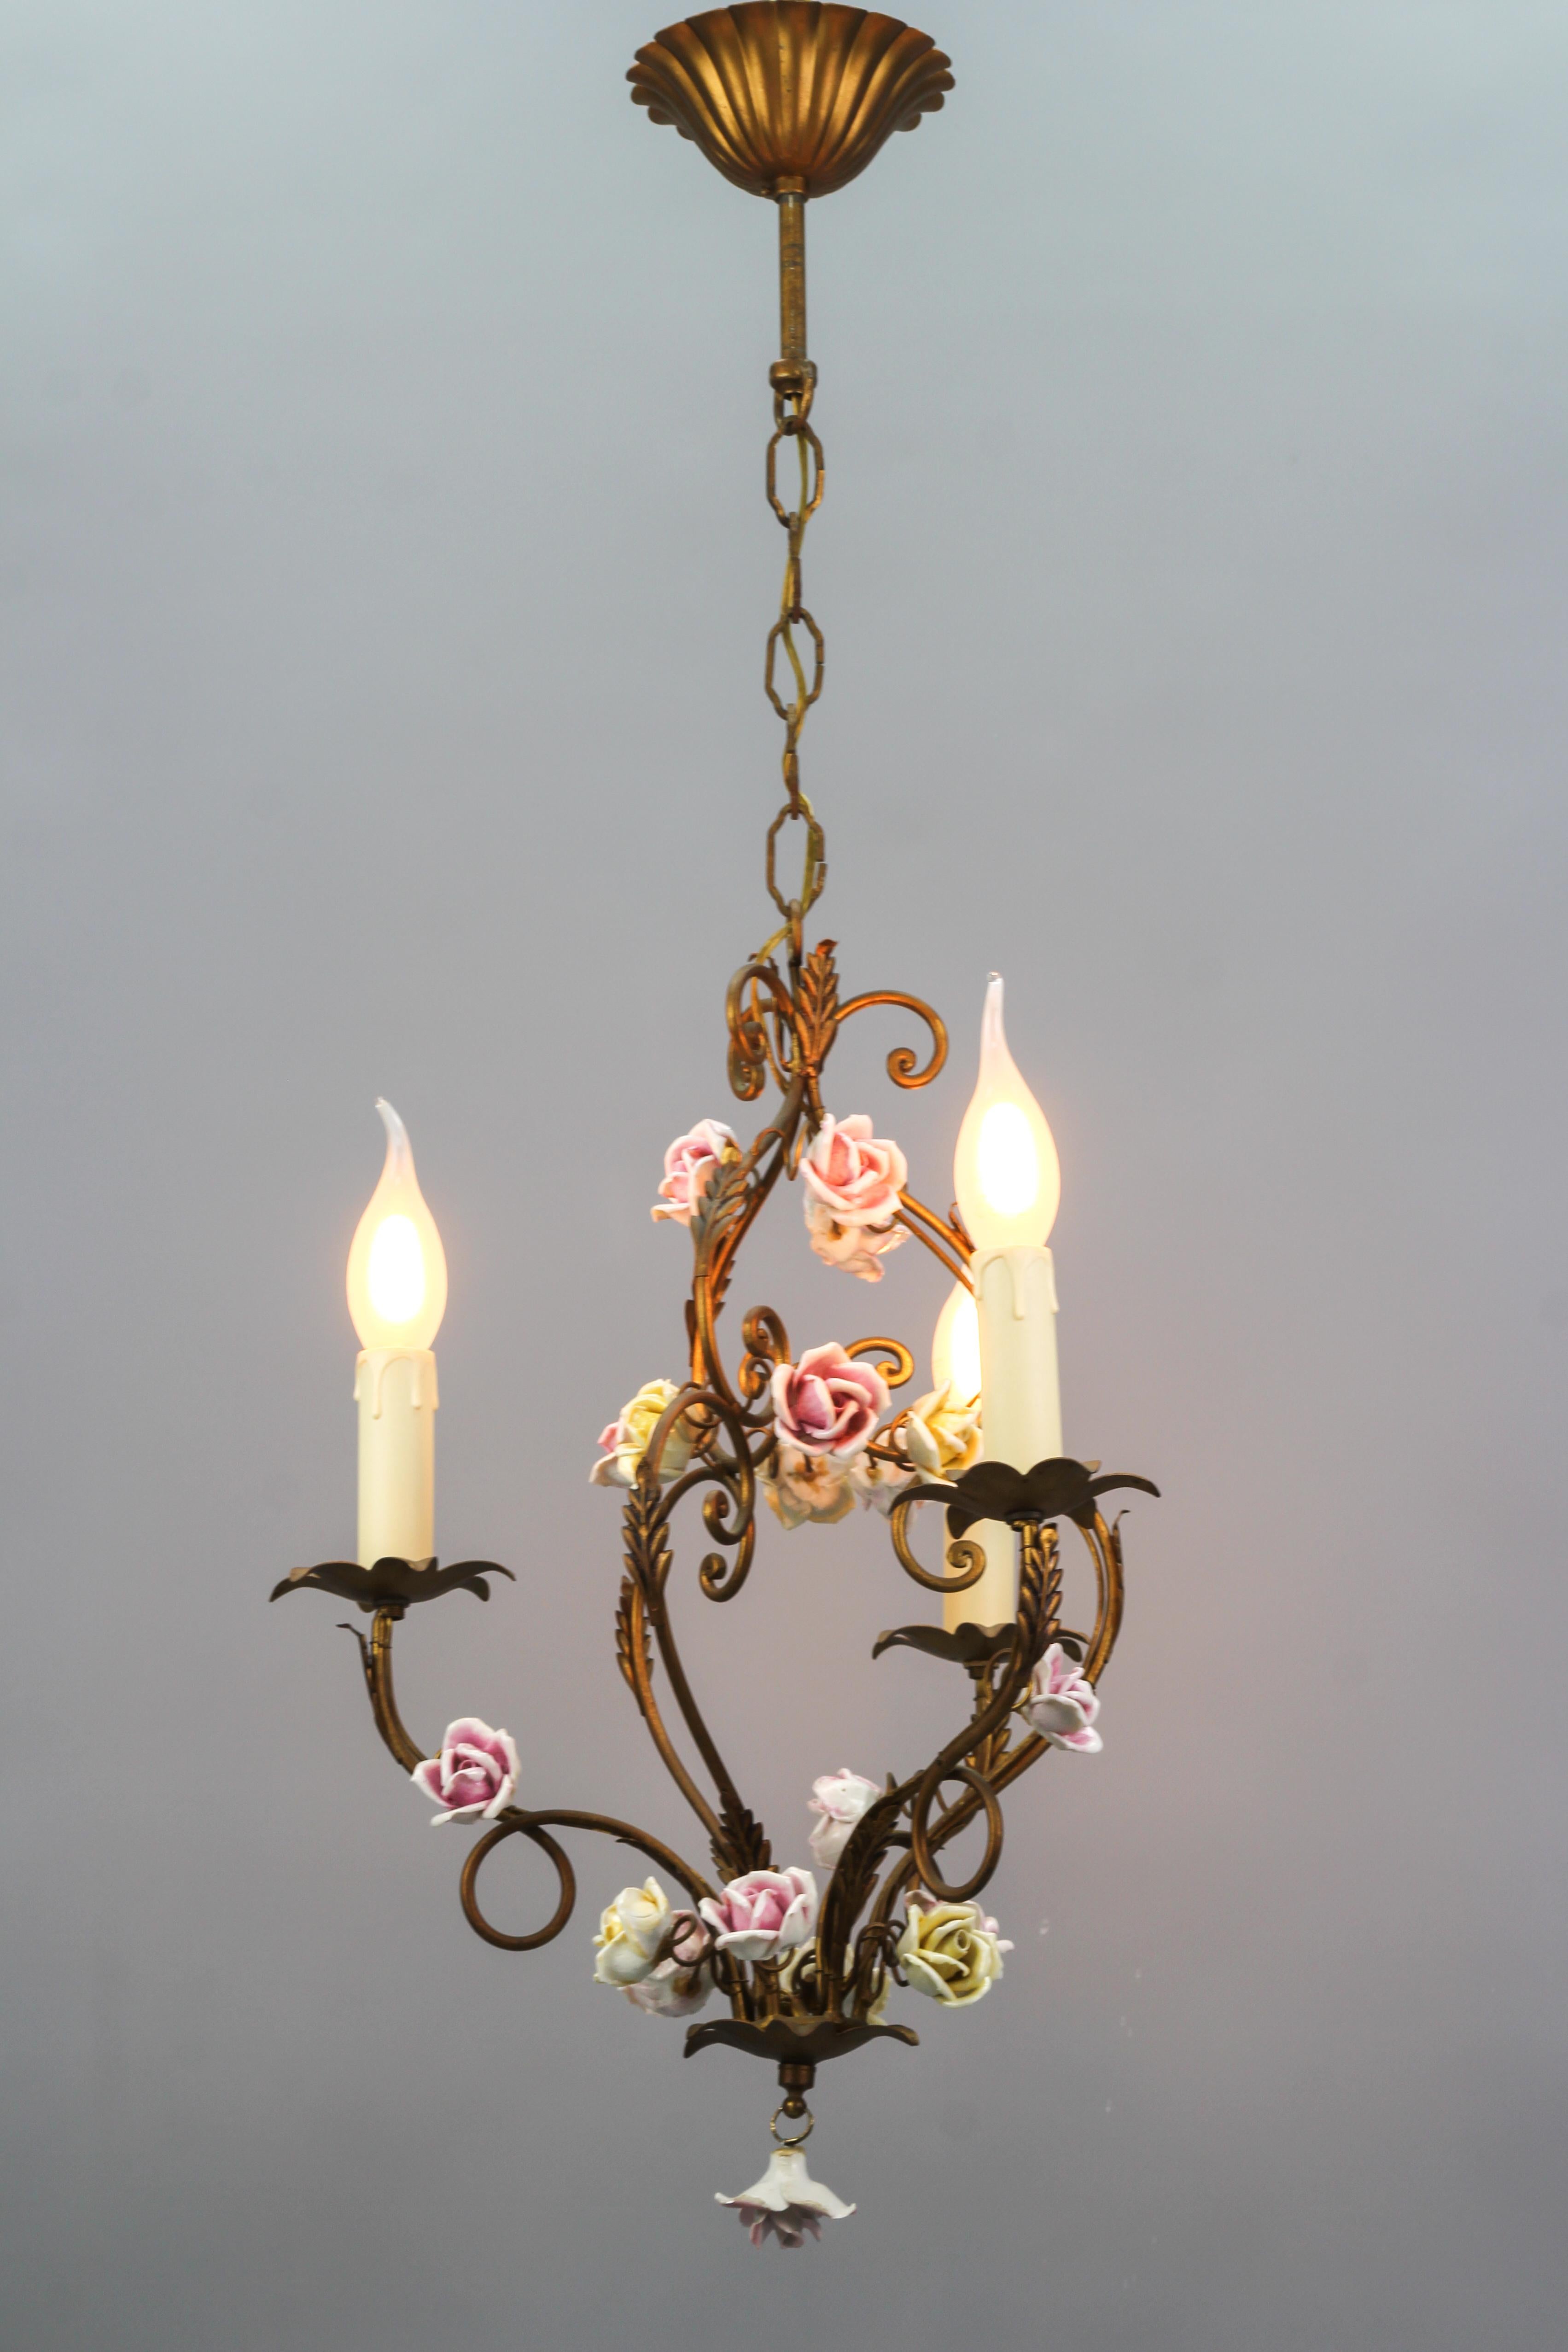 Italian Golden Metal Three-Light Chandelier with Porcelain Roses, ca. 1970s For Sale 7